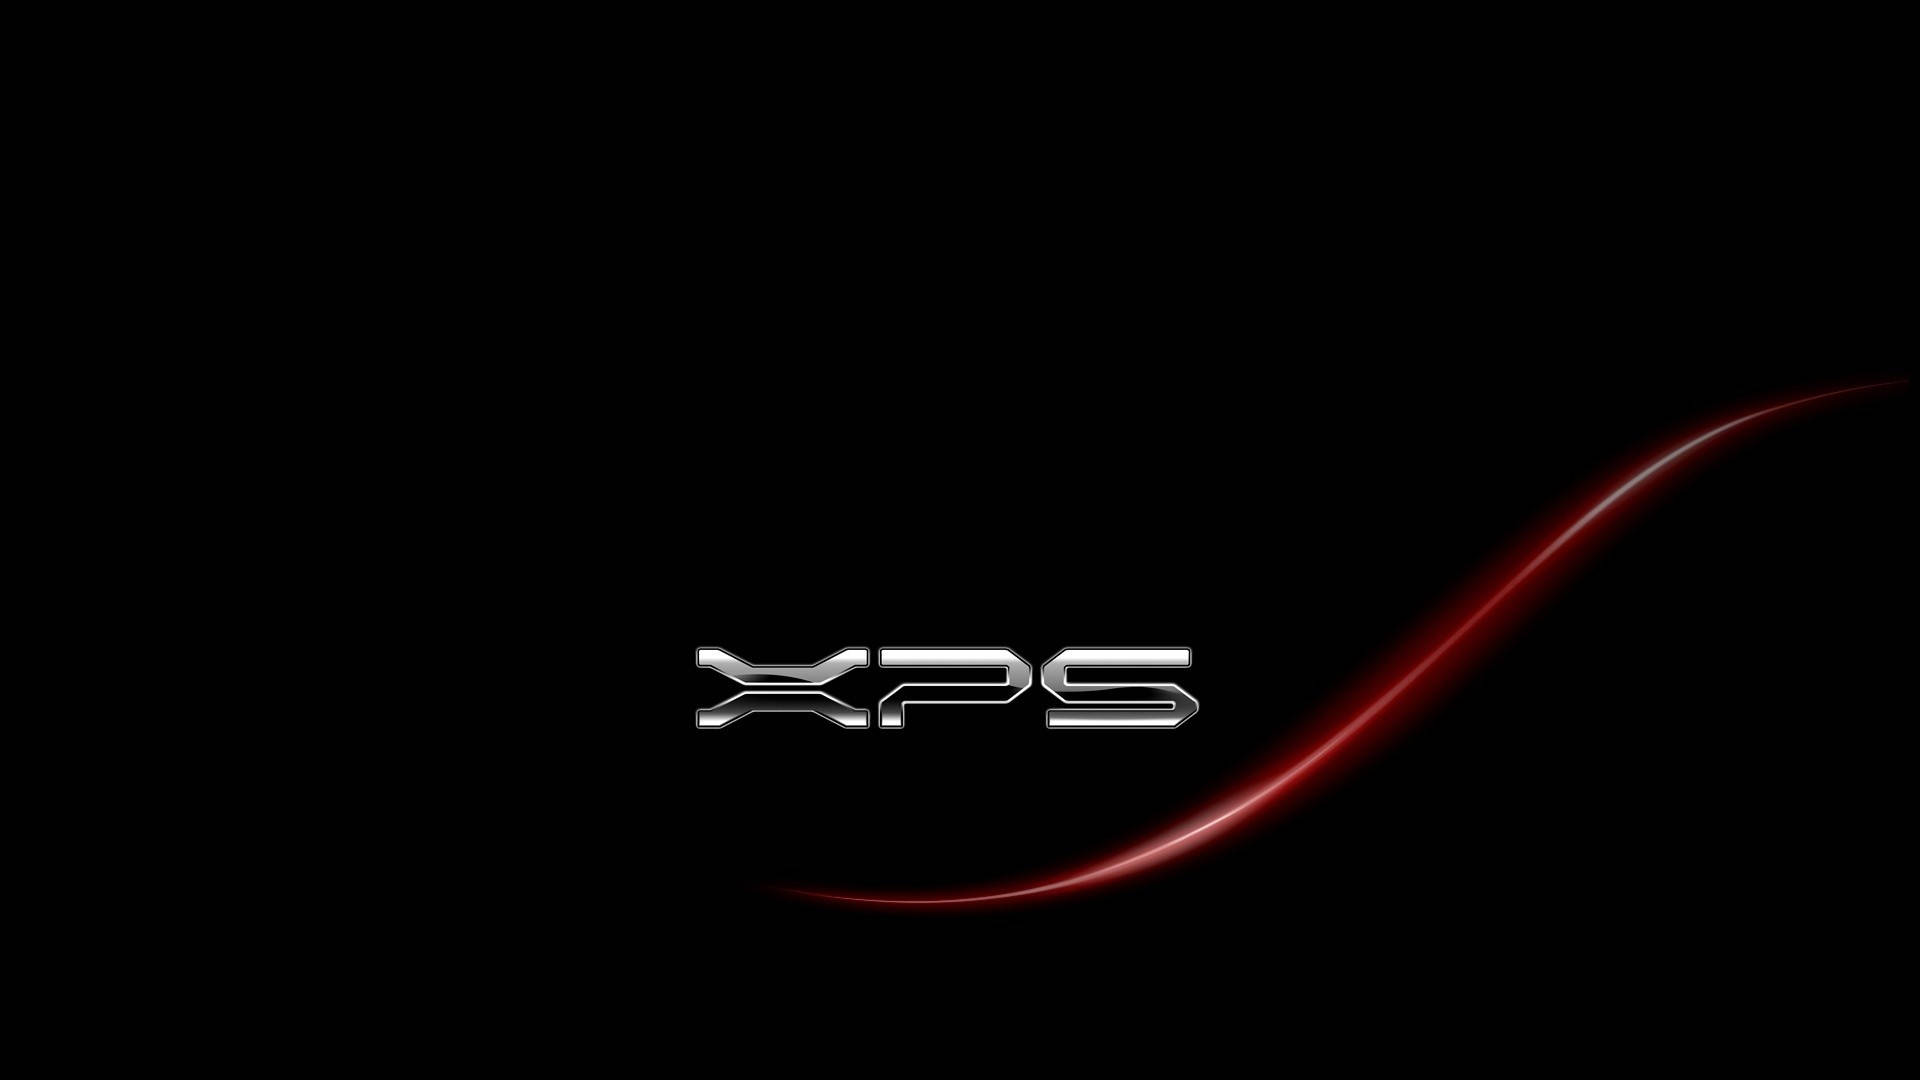 Xps Dell Hd Red Line Wallpaper